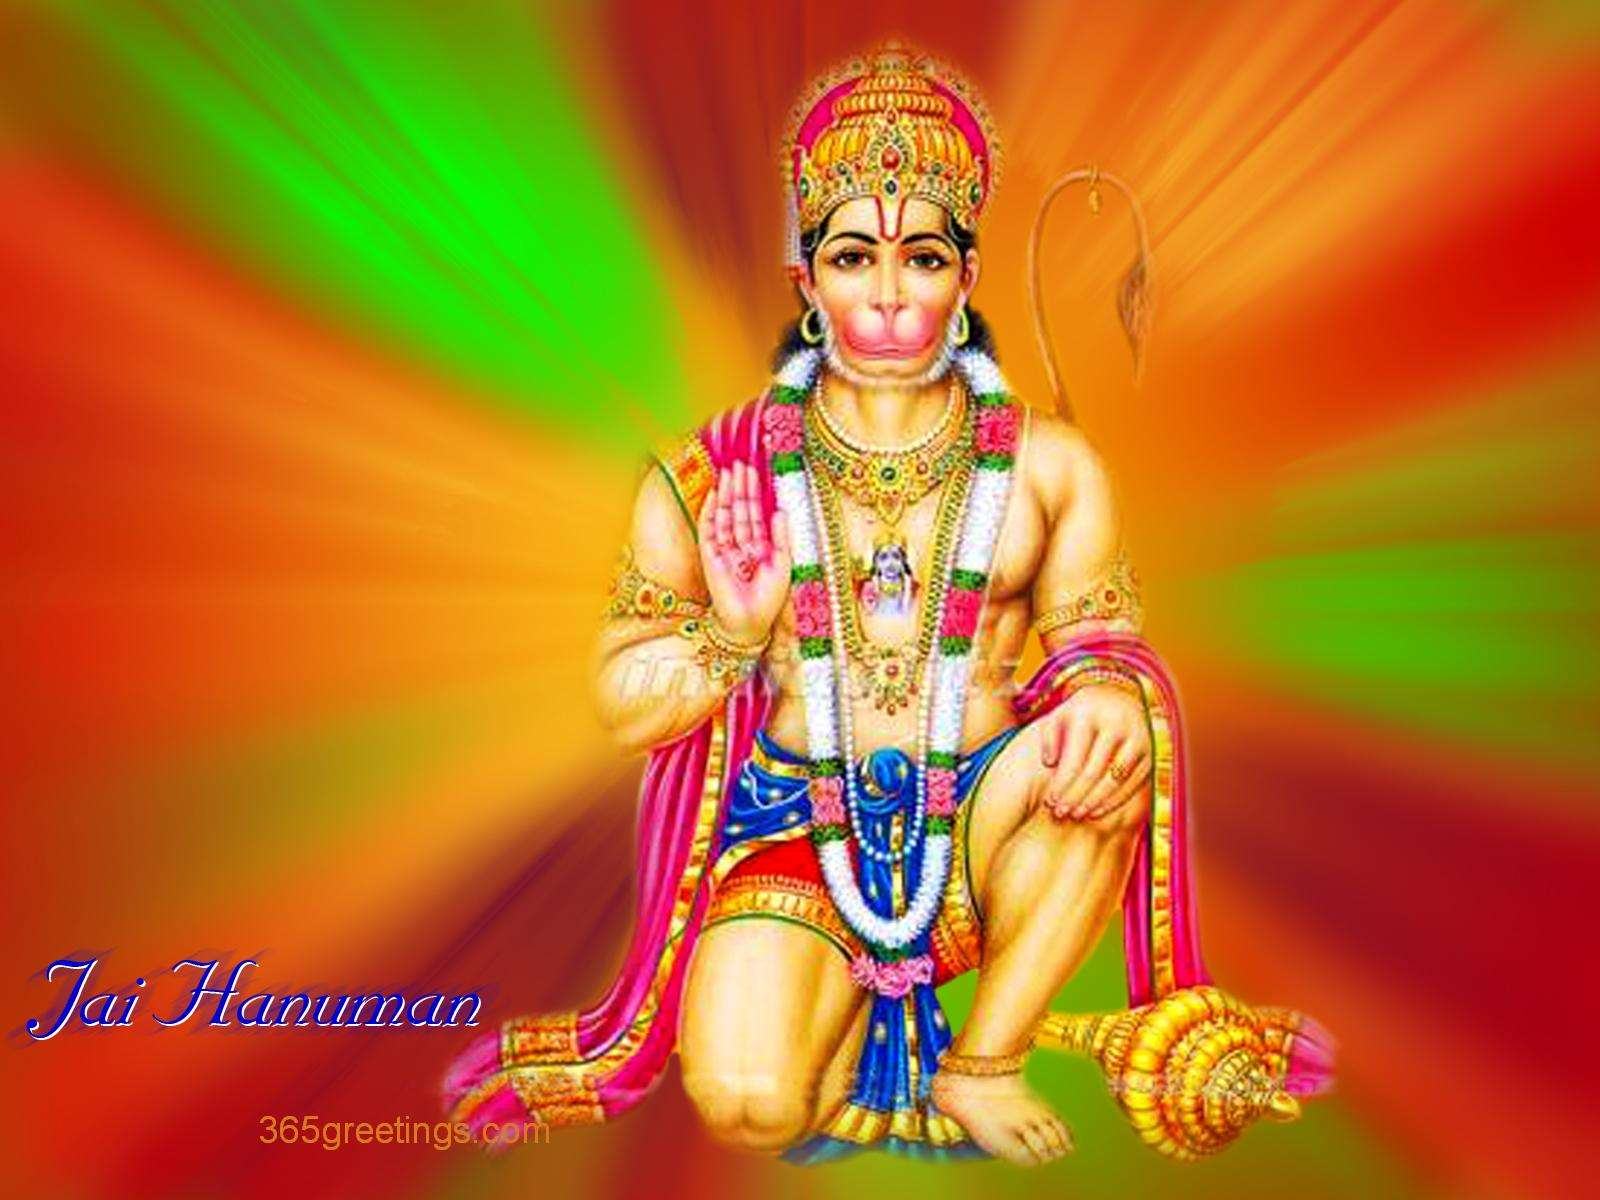 Free Wallpapers Backgrounds   Full Size More hanuman picture wallpaper